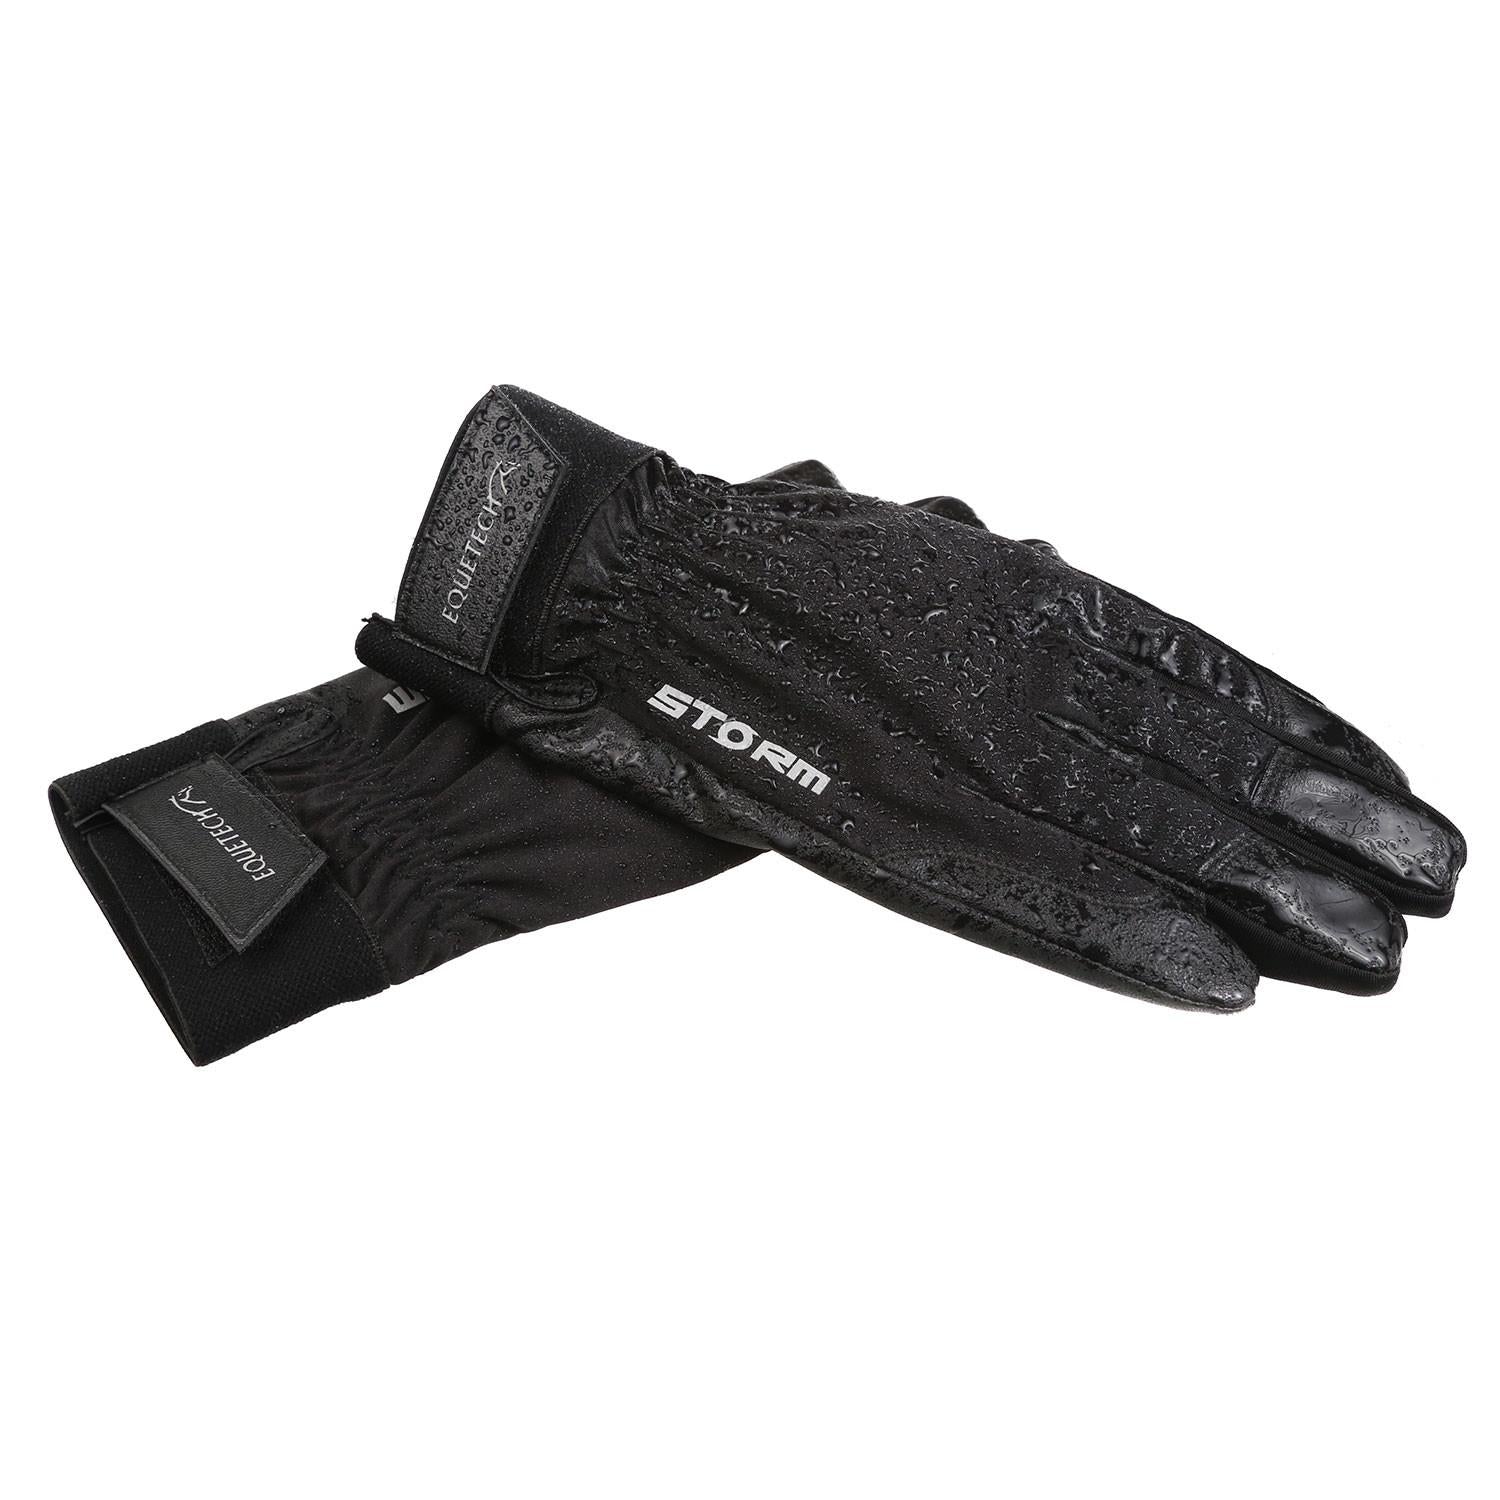 Equetech Childs Storm Waterproof Horse Riding Gloves - Just Horse Riders